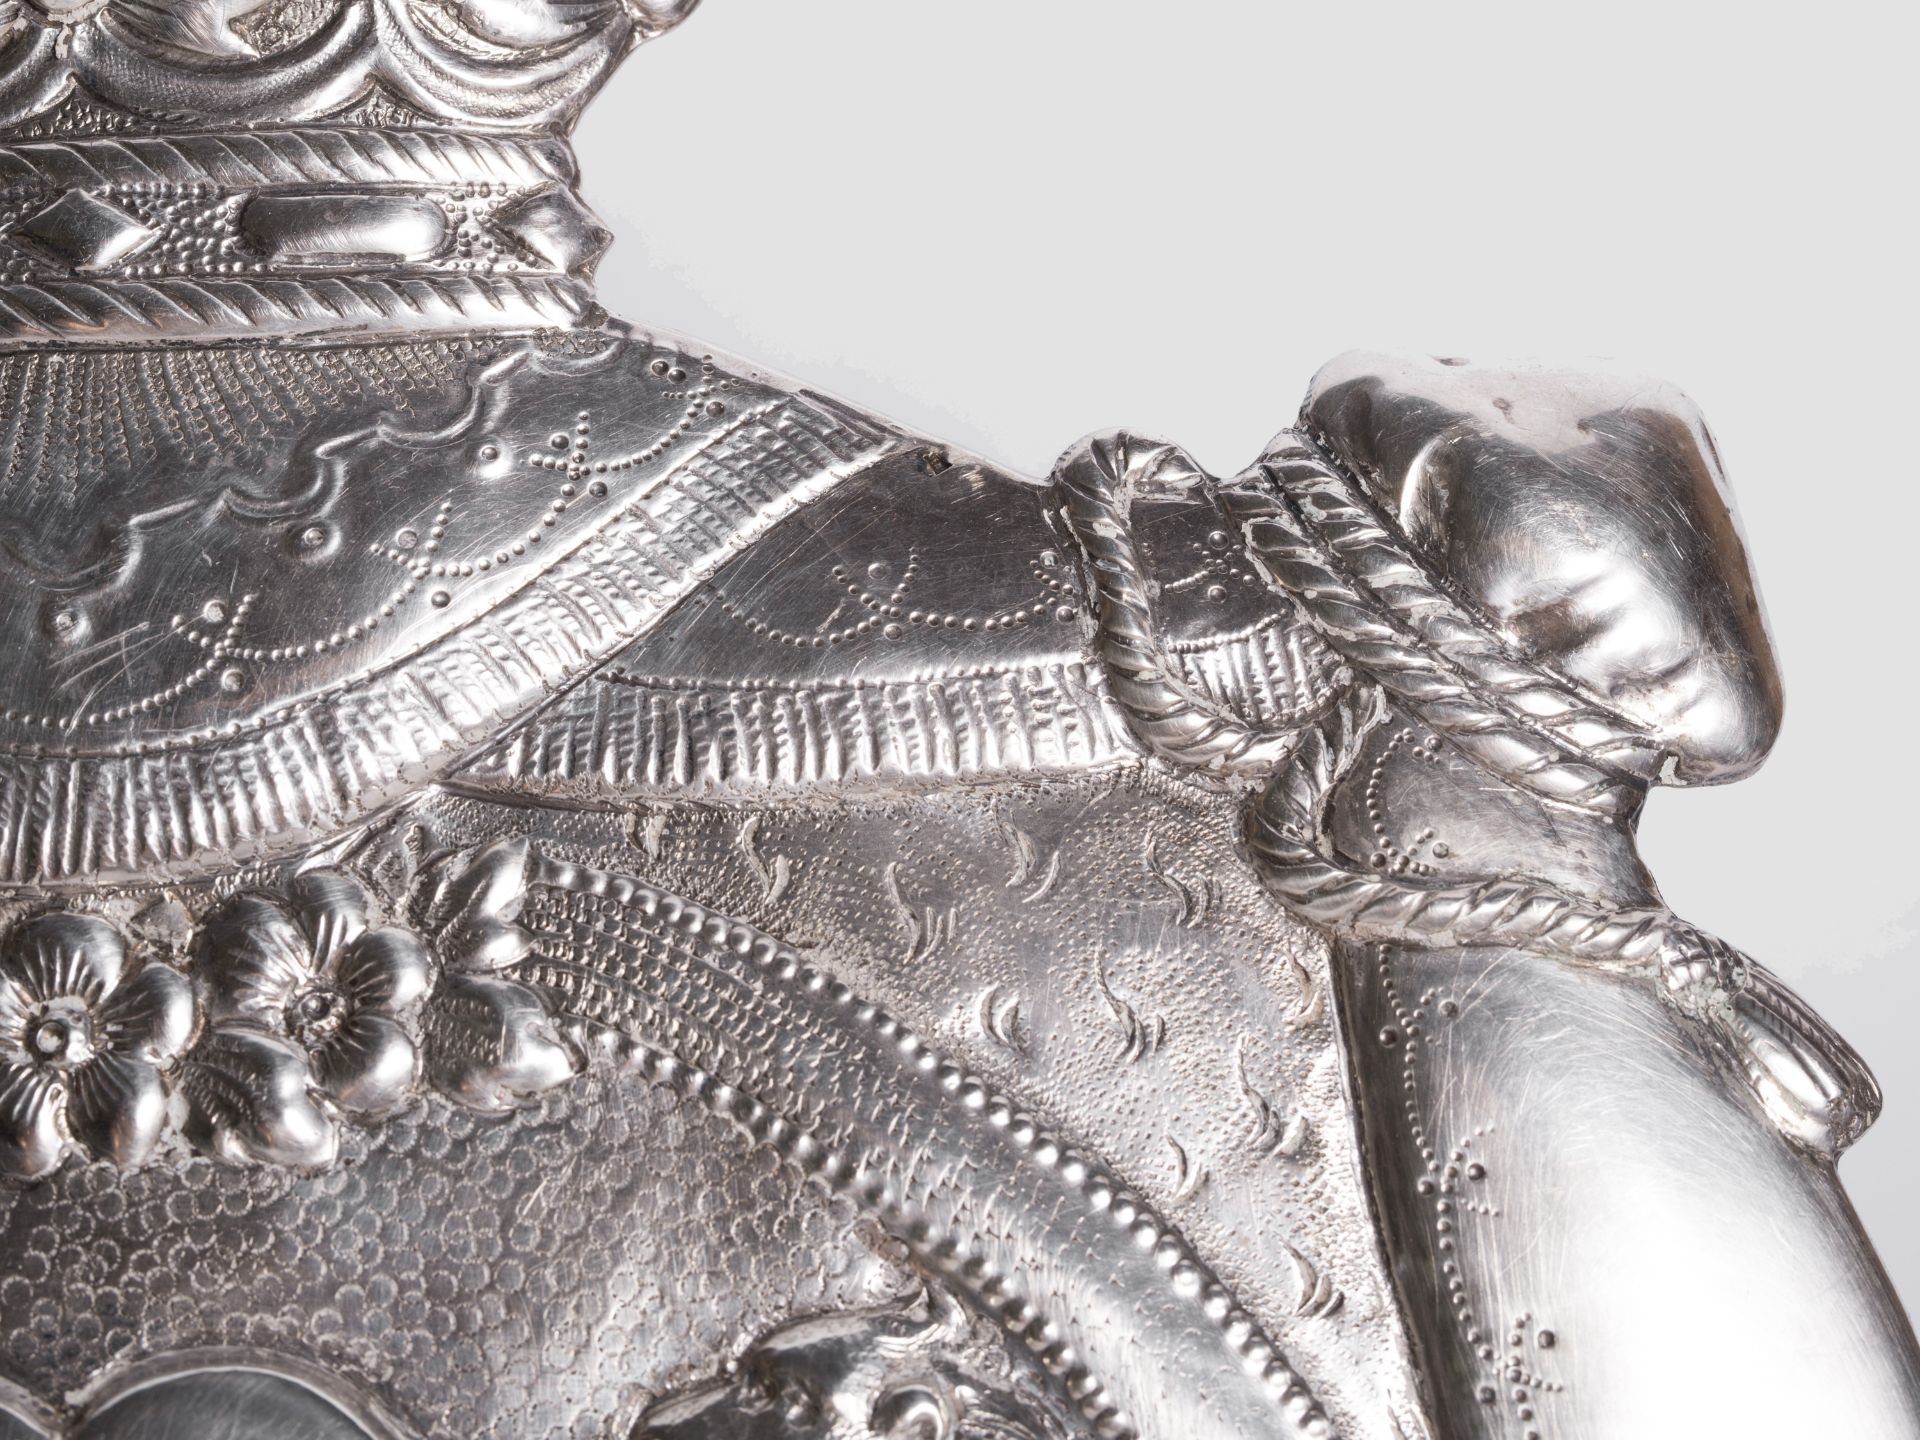 Torah shield, 19th century, Silver, chased & engraved in relief - Image 4 of 4